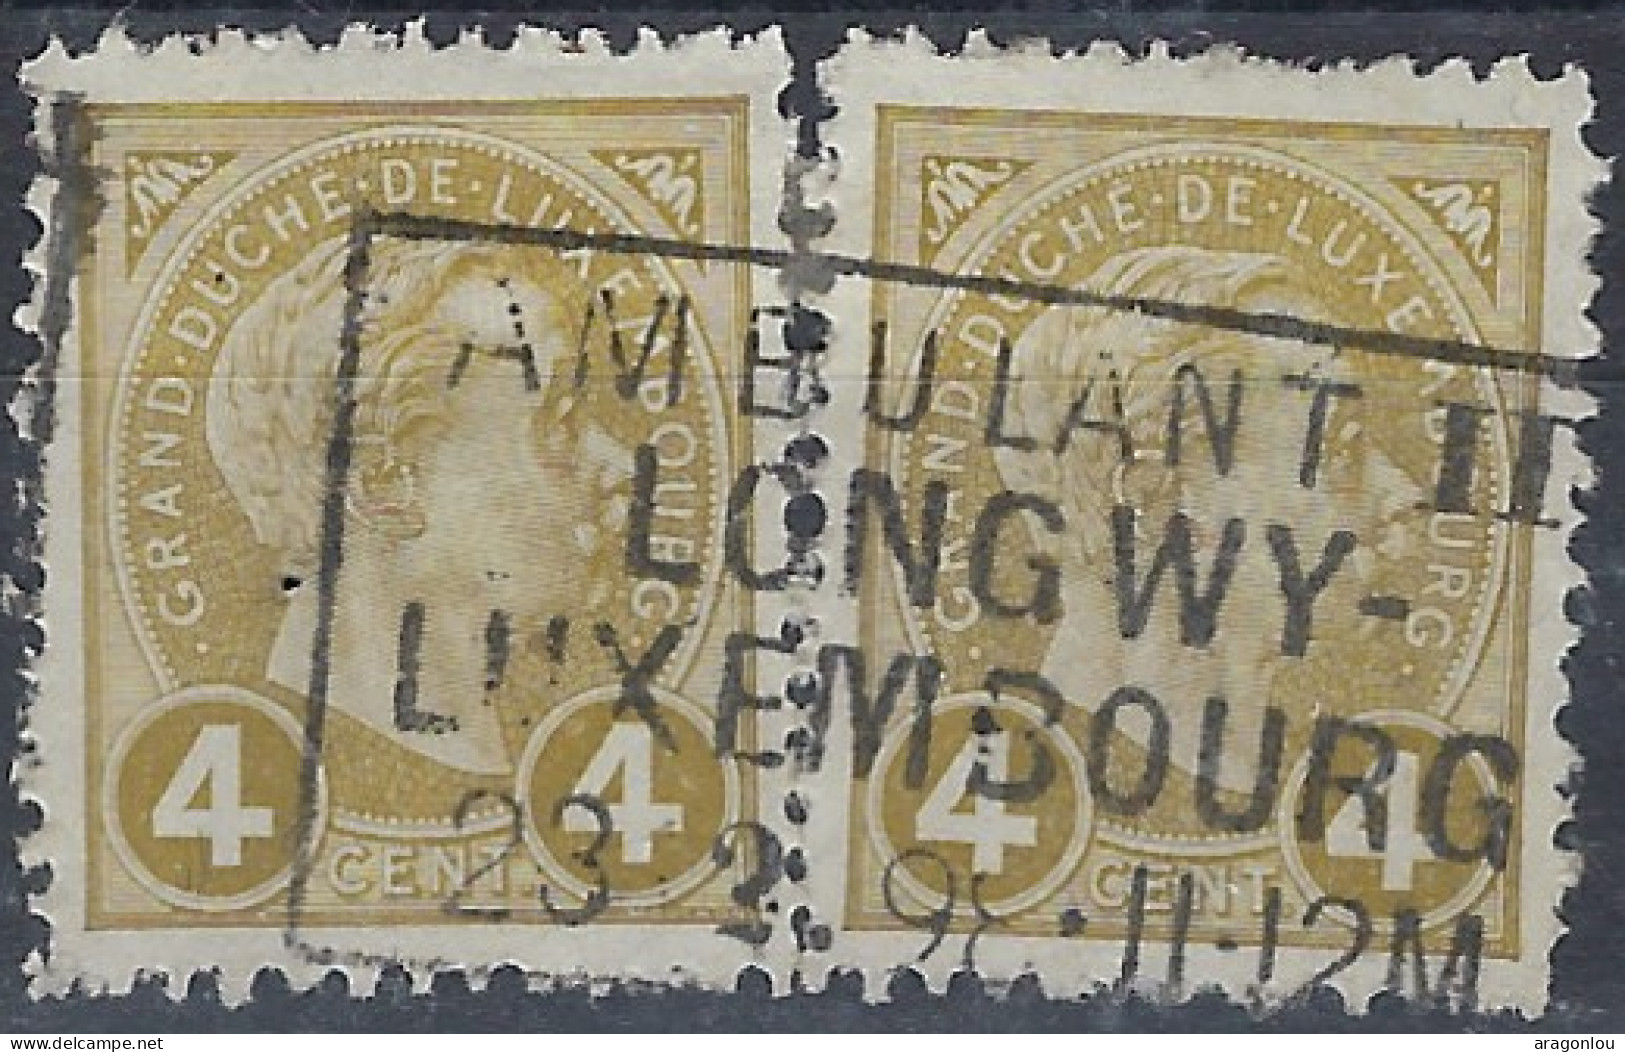 Luxembourg - Luxemburg - Timbres - Adolphe  -  Cachet  Ambulant  -  Longwy - Luxembourg   Paire   ° - 1895 Adolphe De Profil